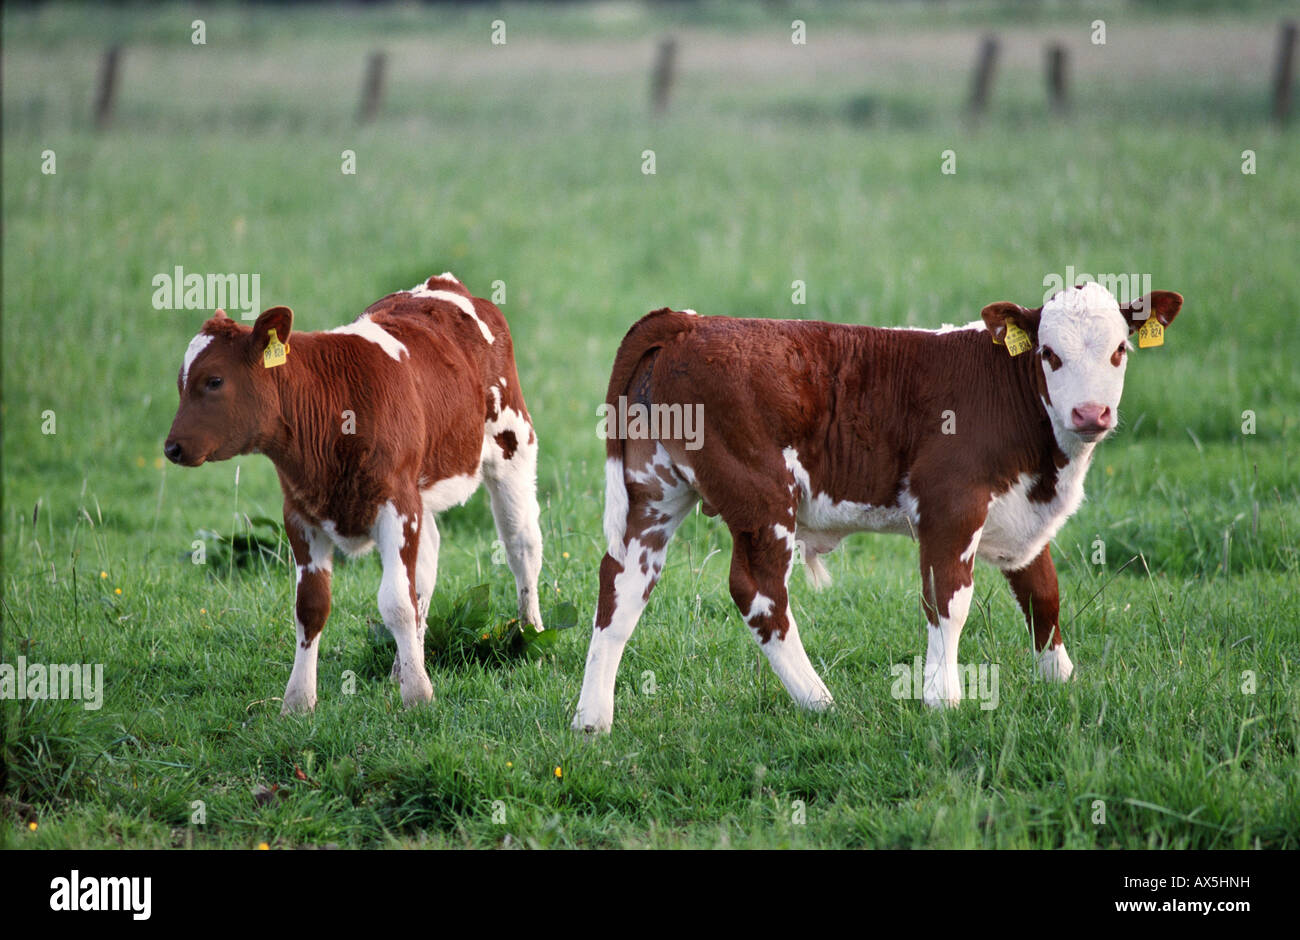 Two red-coloured calves (Bovidae) on a pasture Stock Photo